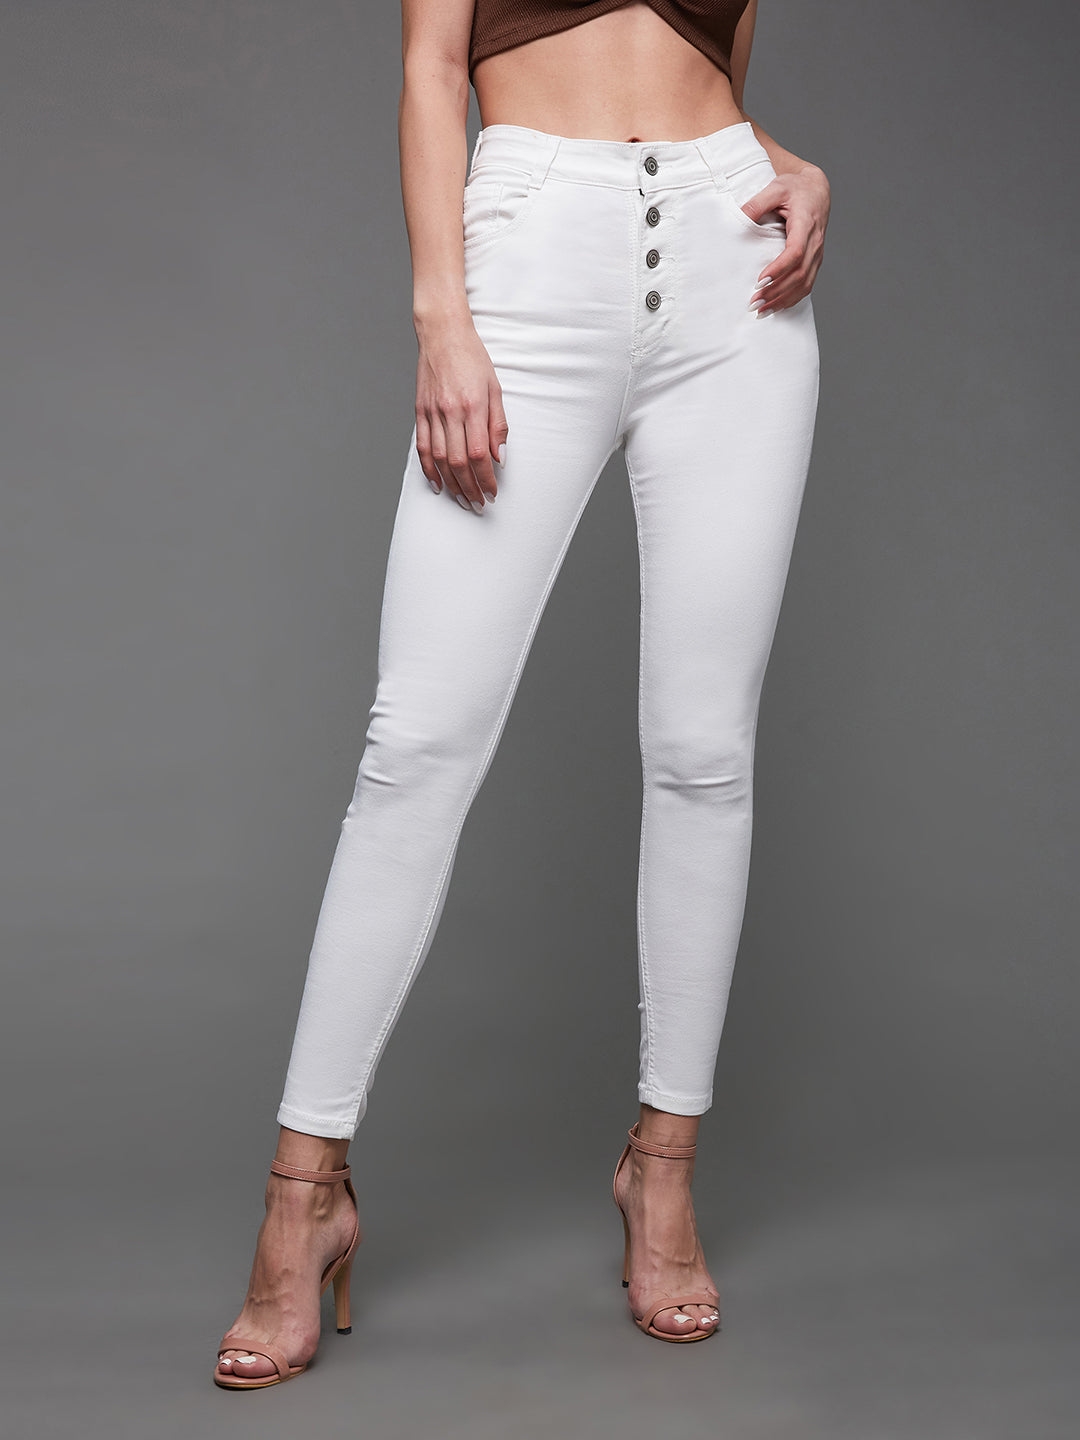 MISS CHASE | White Skinny Fit High Rise Clean Look Stretchable Regular Length Bleached Denim Jeans